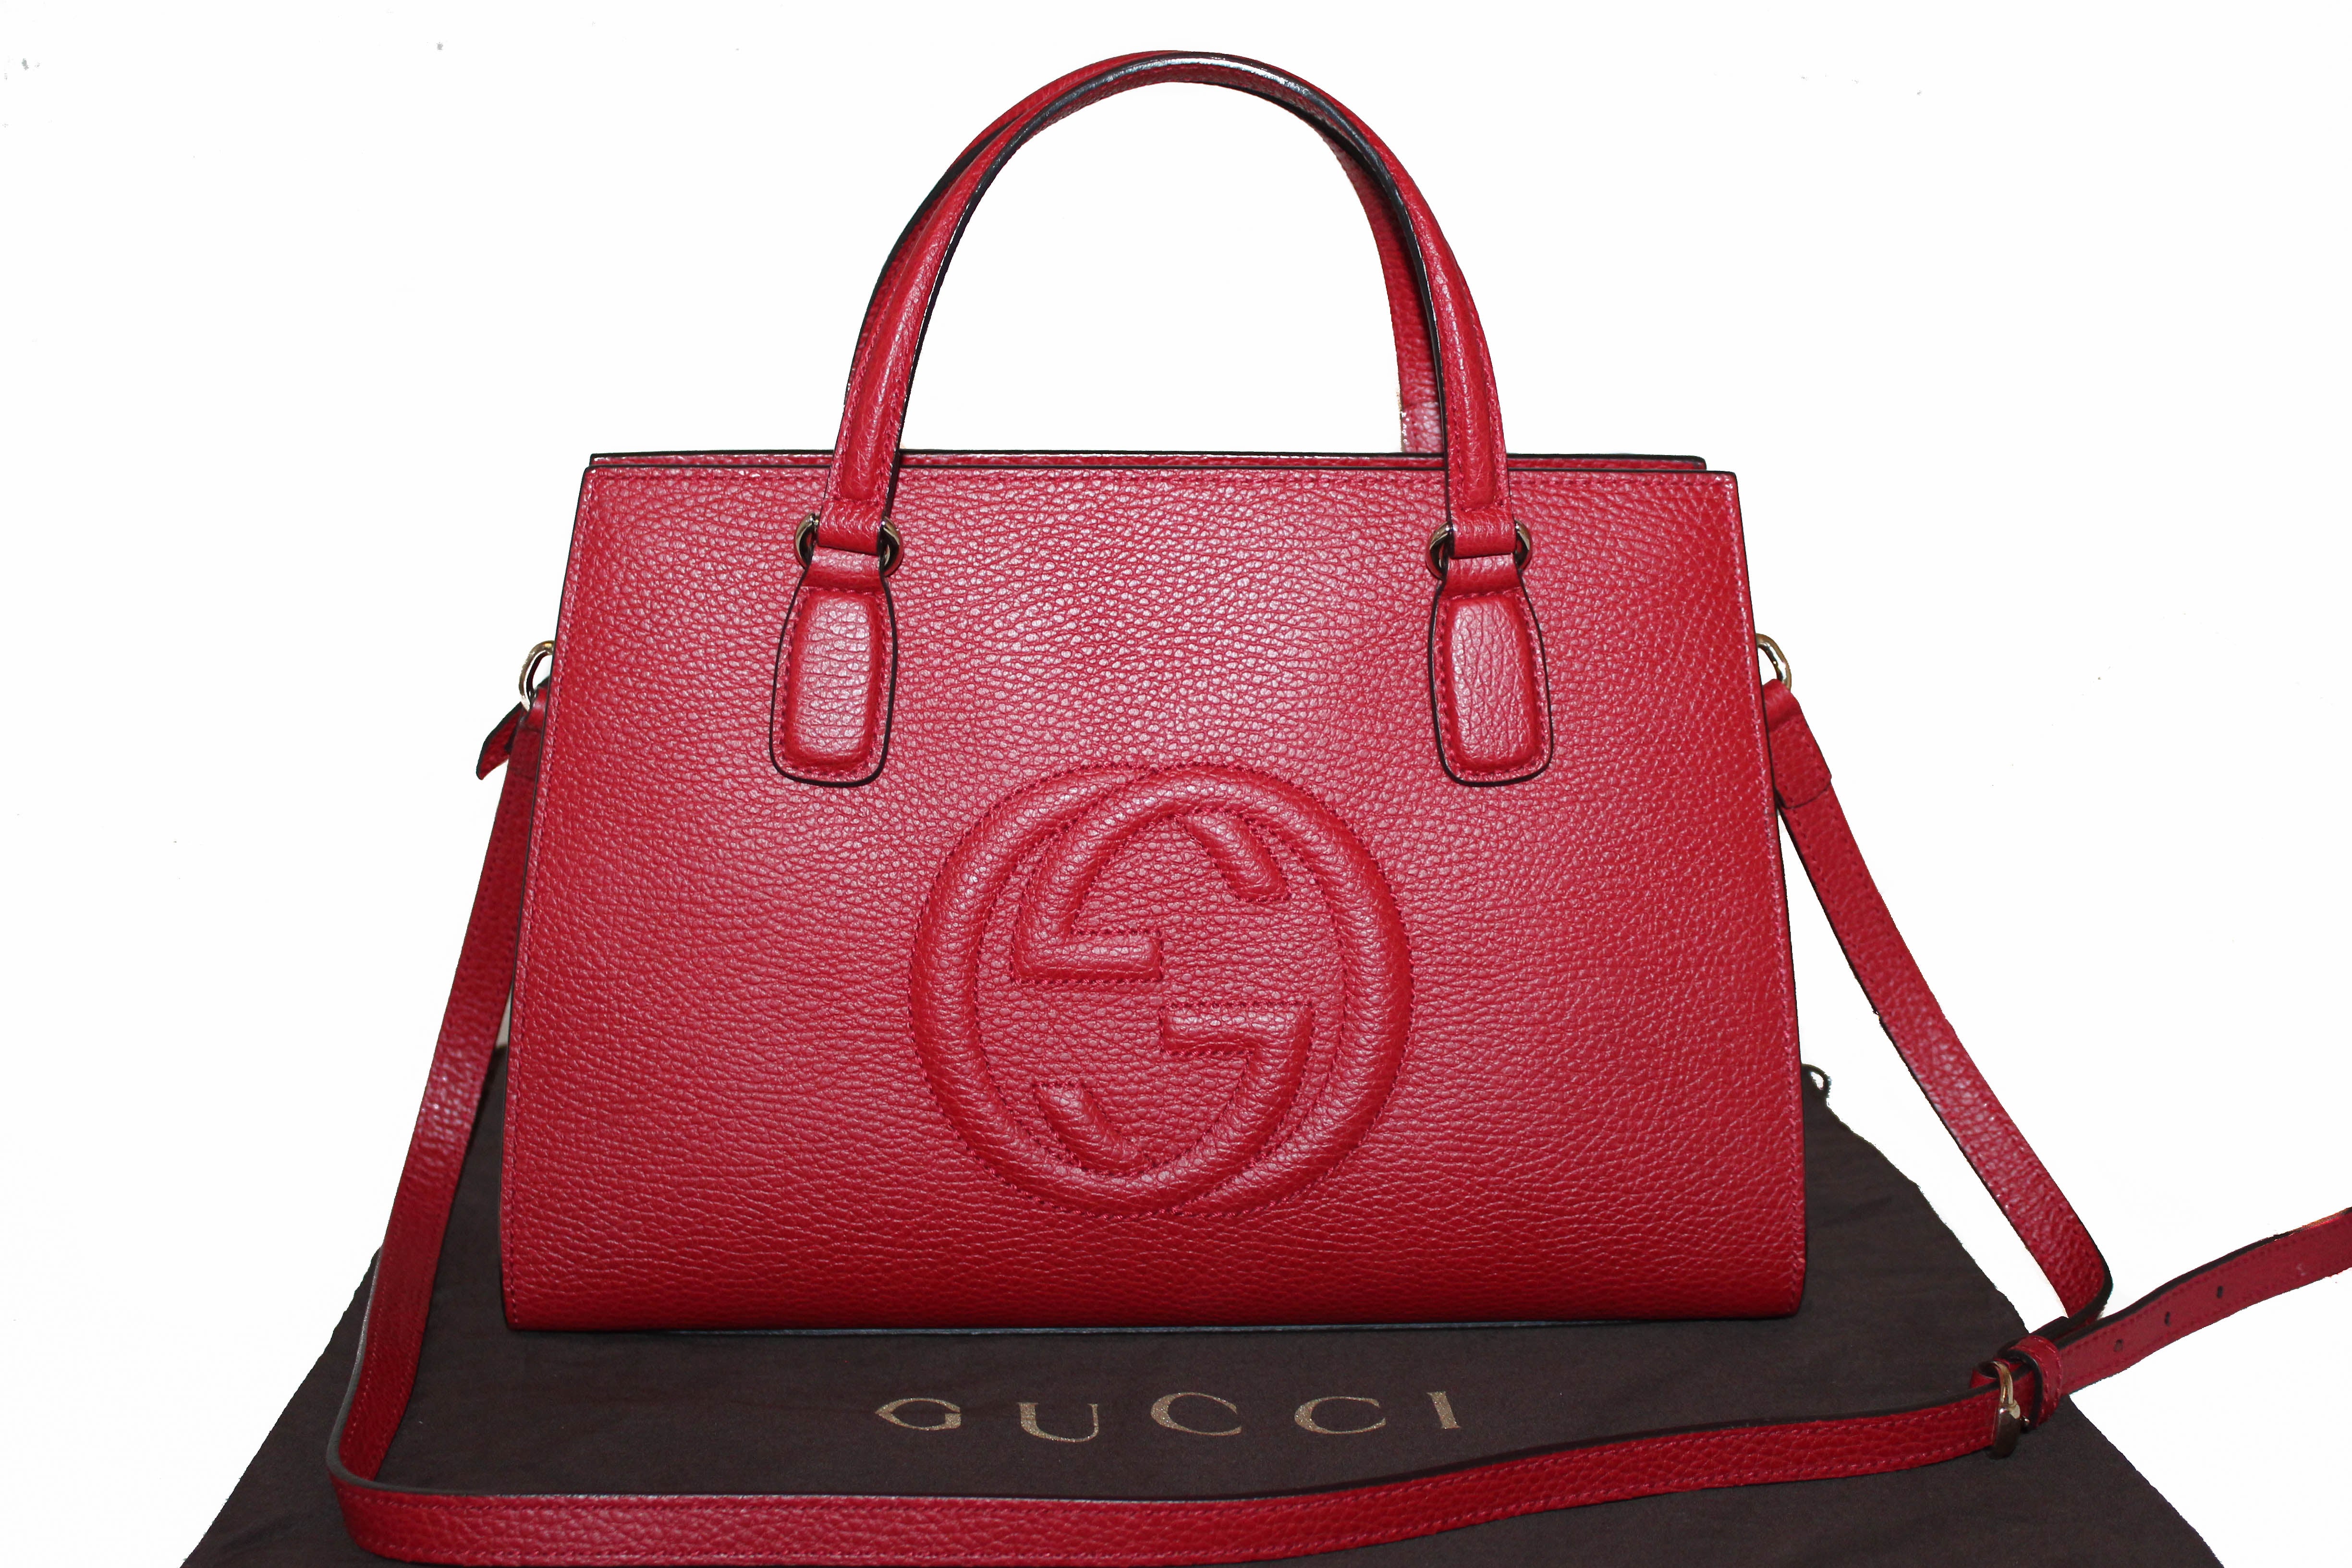 Authentic Gucci Red Soho Pebbled Leather Tote Hand Bag/Cross Body Bag